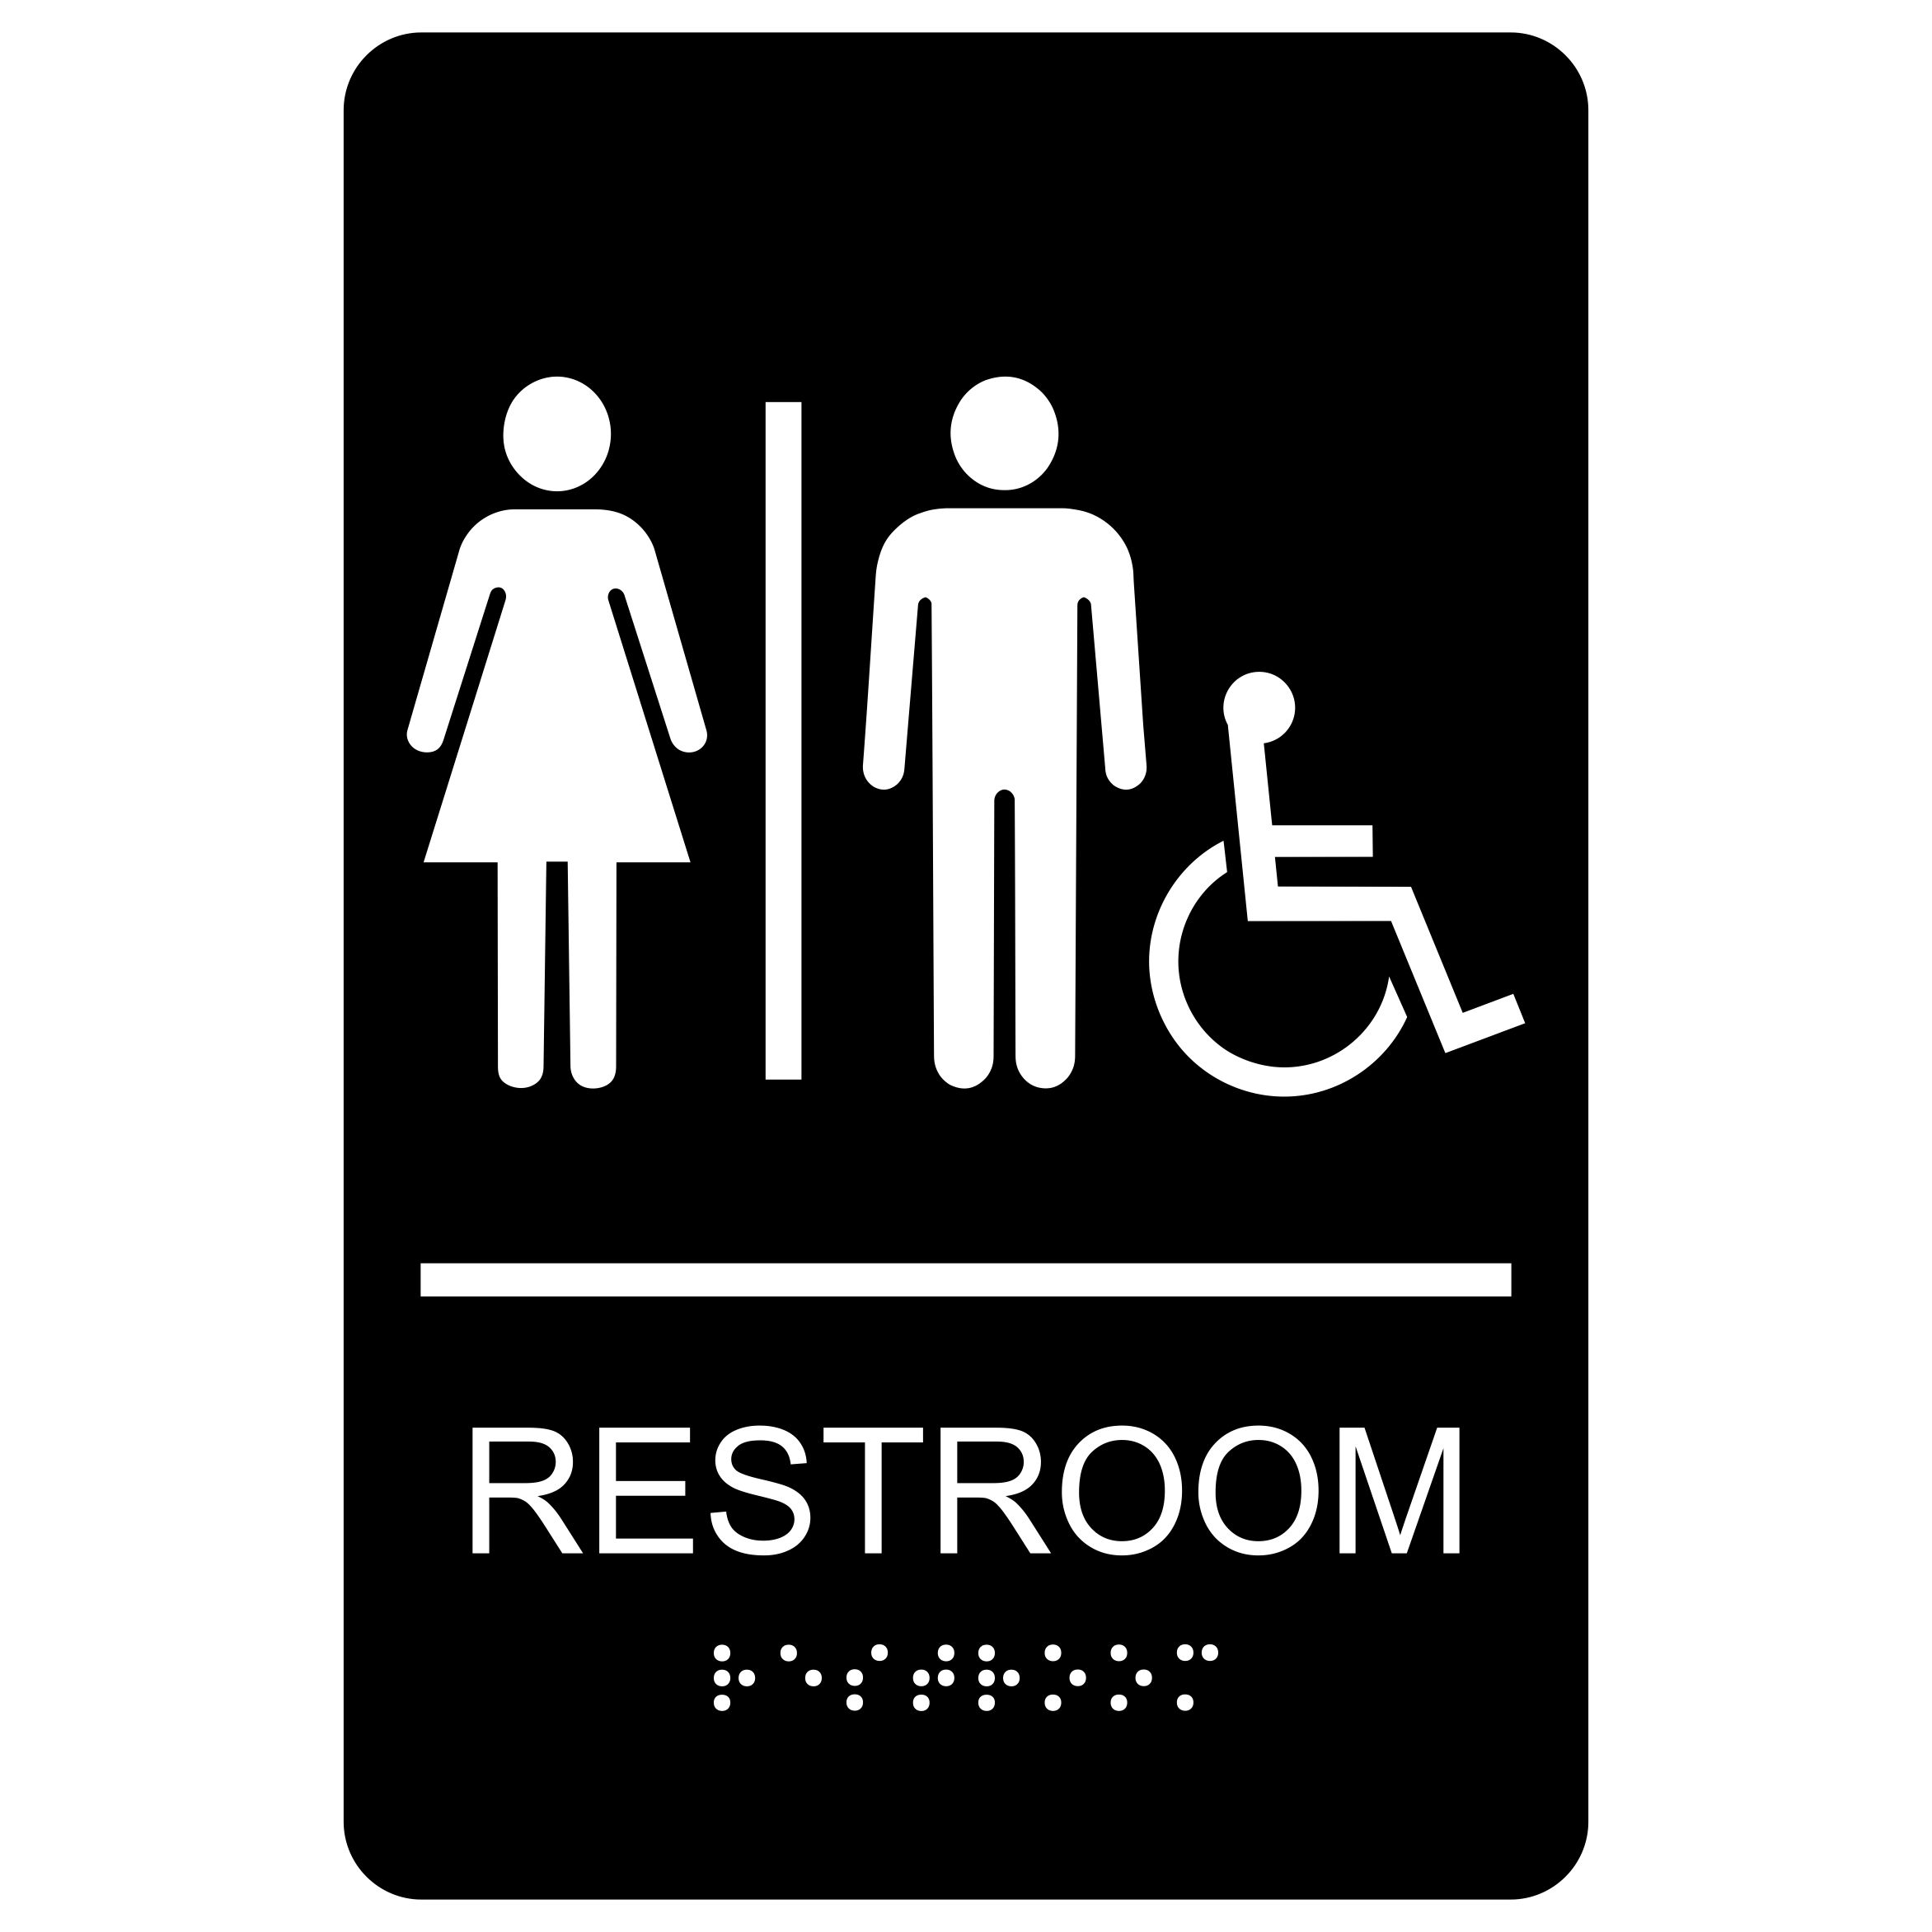 Women/Men Restroom with Wheelchair Symbol - Economy ADA signs with ...